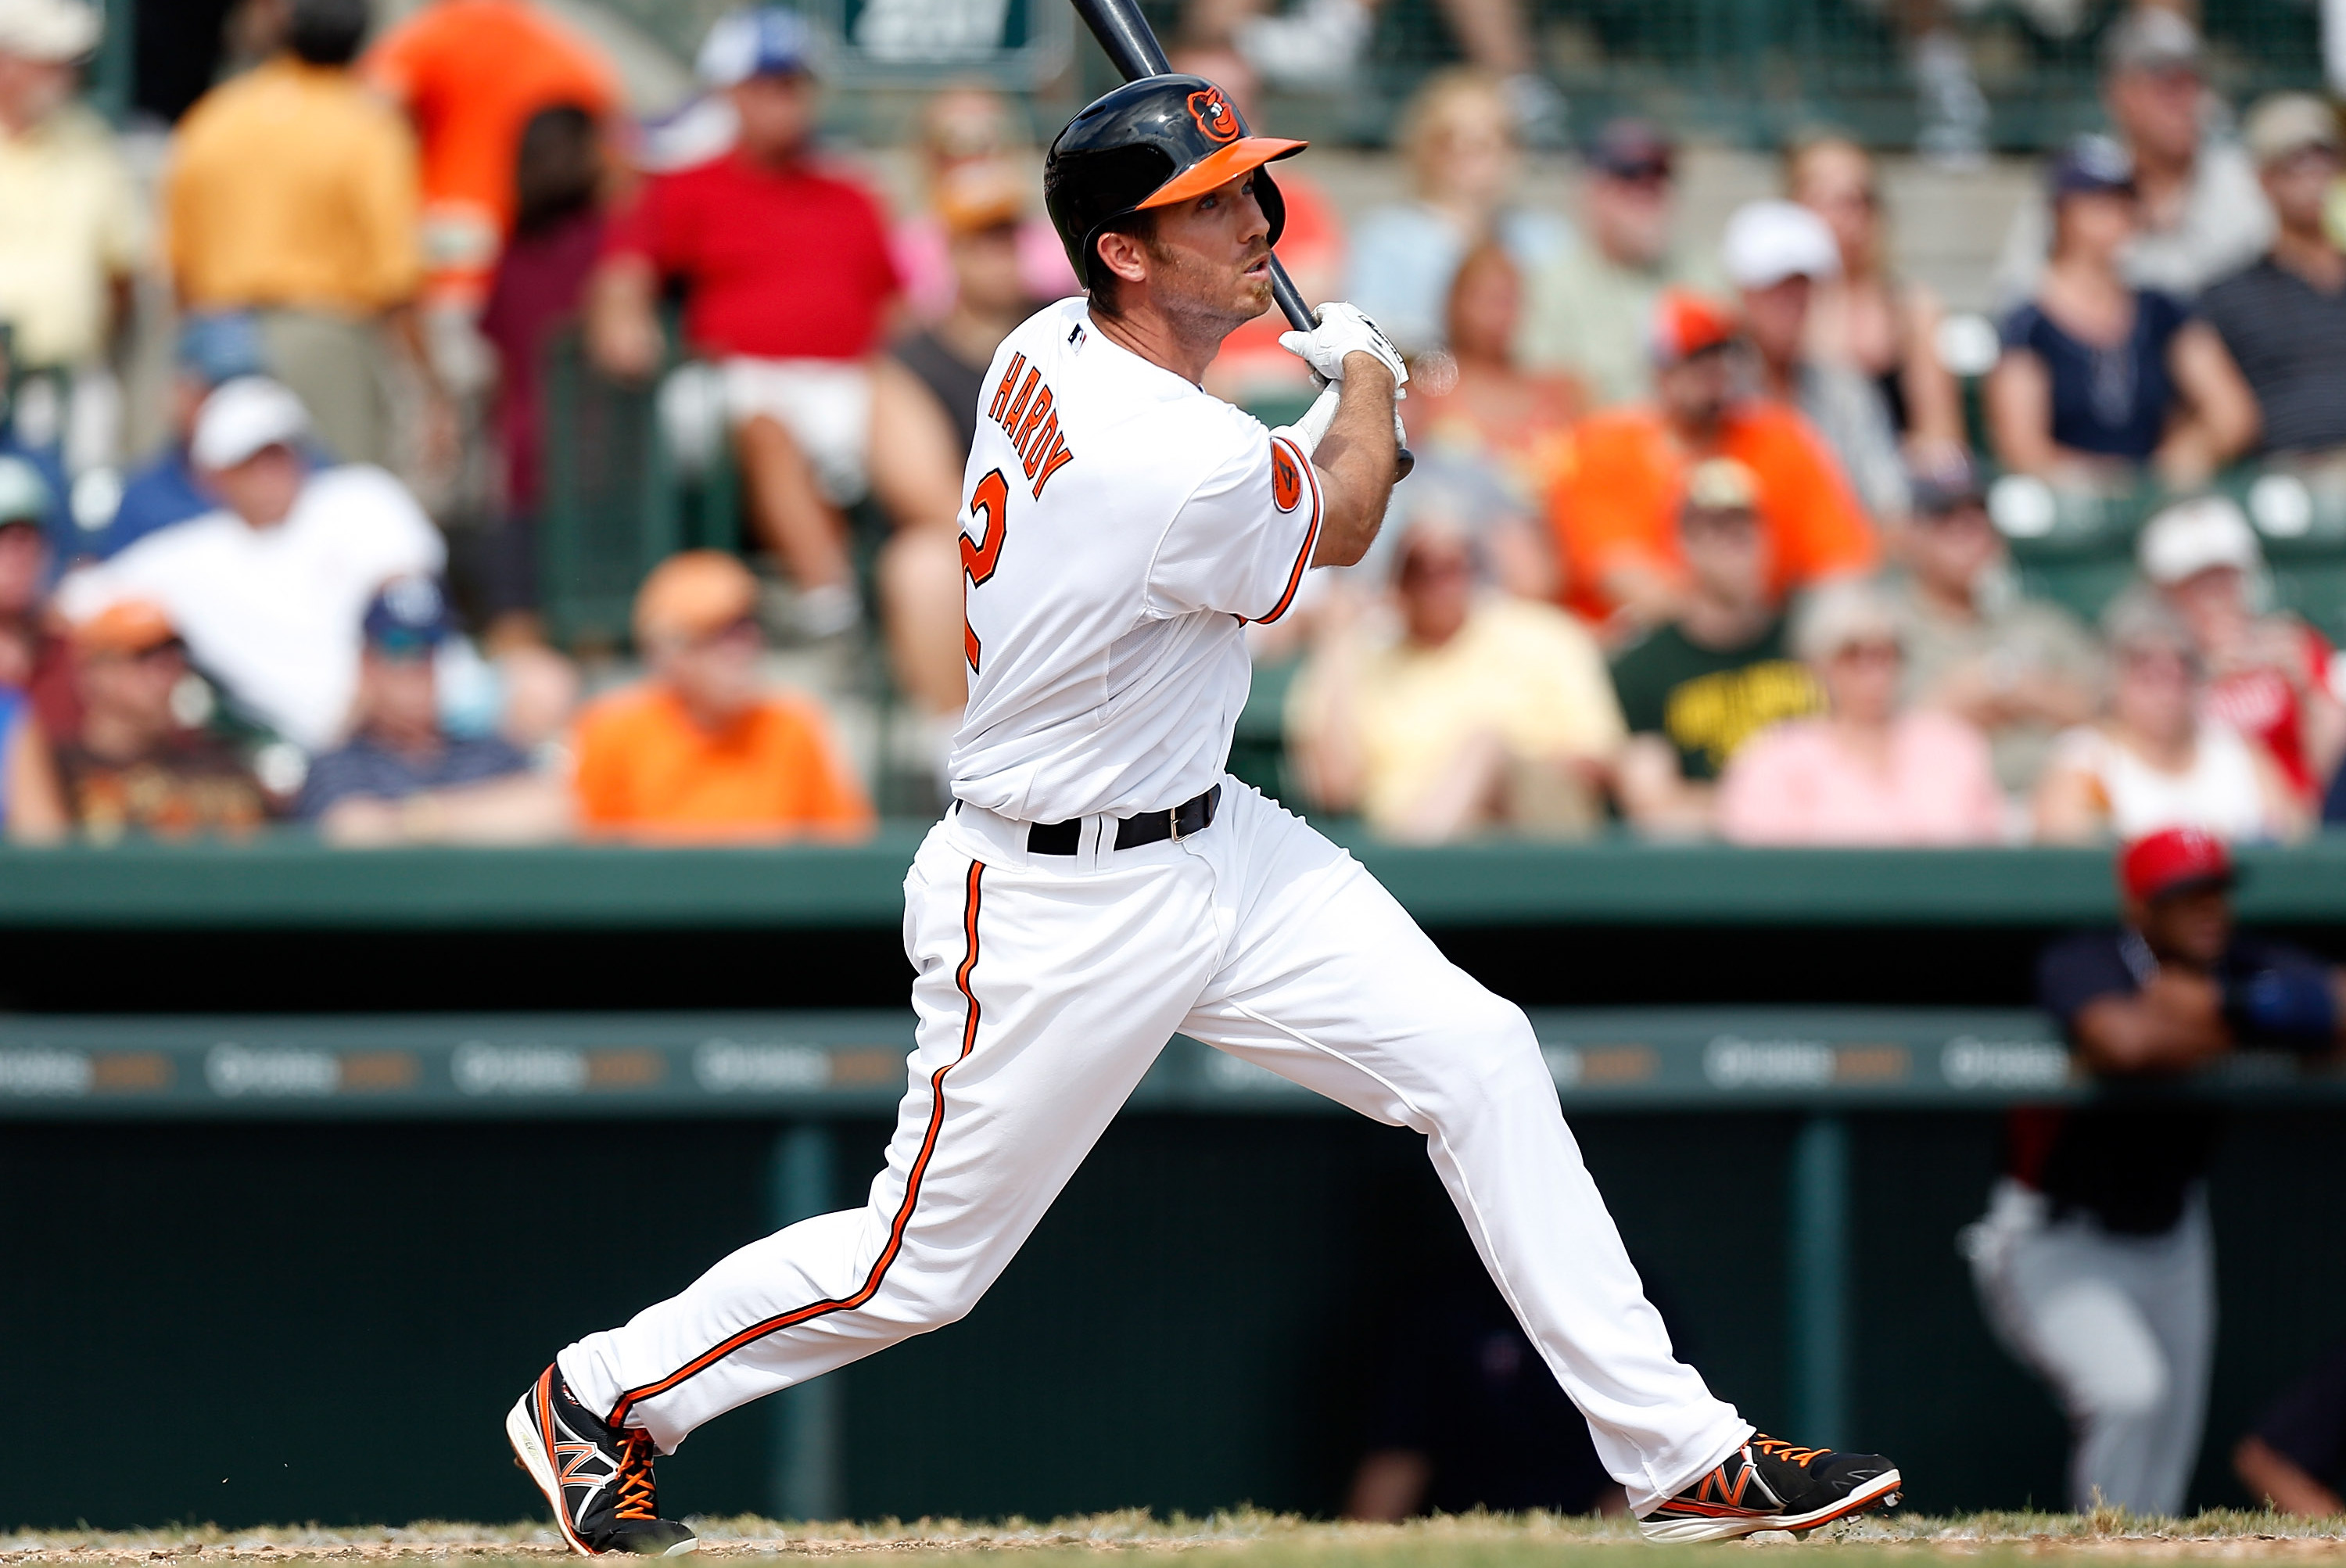 Orioles' J.J. Hardy finally validated as one of game's top shortstops